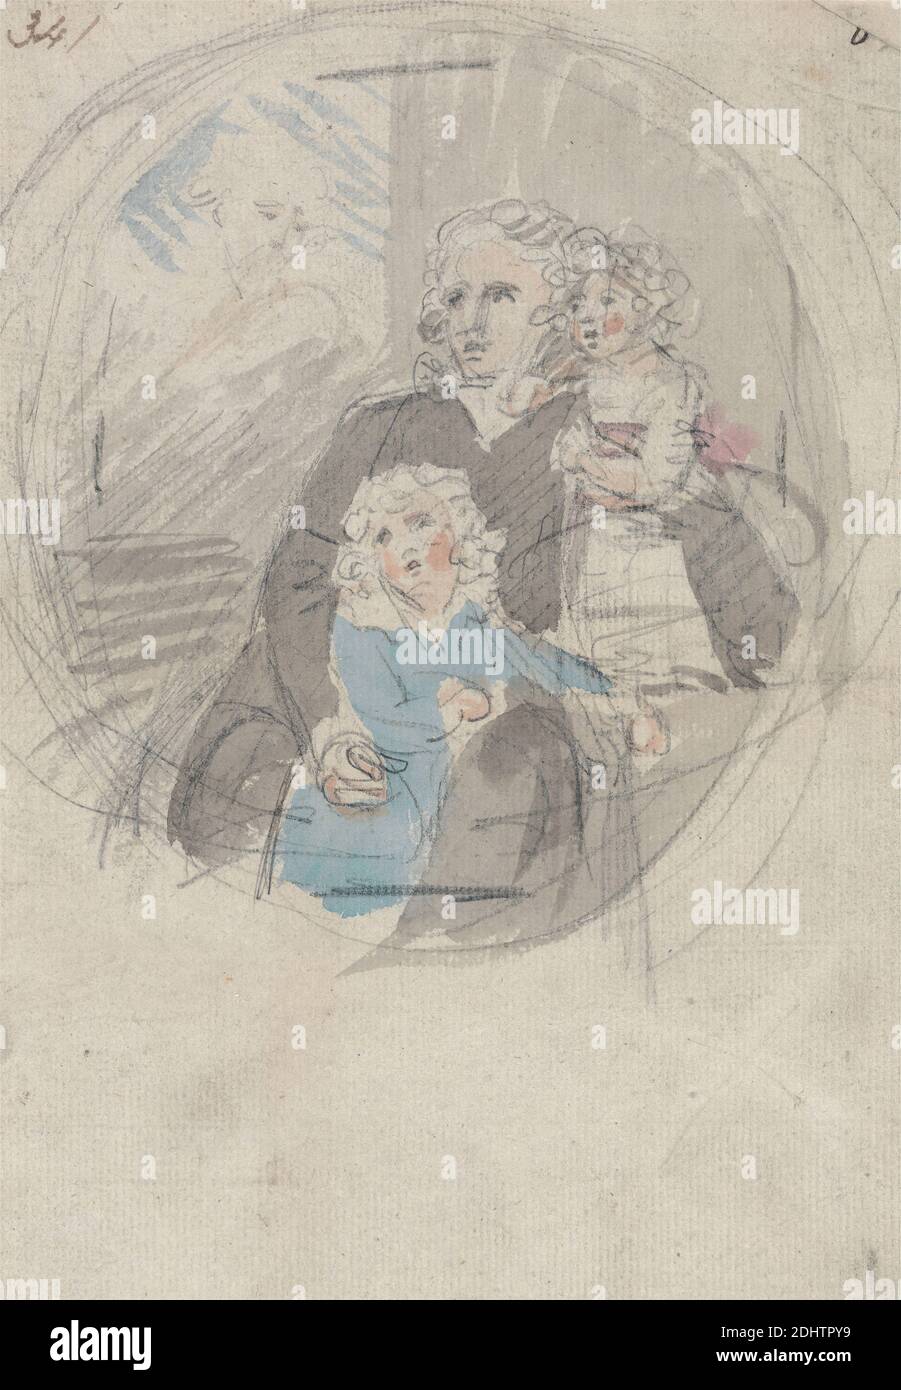 Study for a Portrait Group, Samuel Shelley, 1750–1808, British, undated, Watercolor and graphite on medium, moderately textured, blued white laid paper, Sheet: 7 1/2 × 5 1/4 inches (19.1 × 13.3 cm), children, family, father, figure study, genre subject Stock Photo